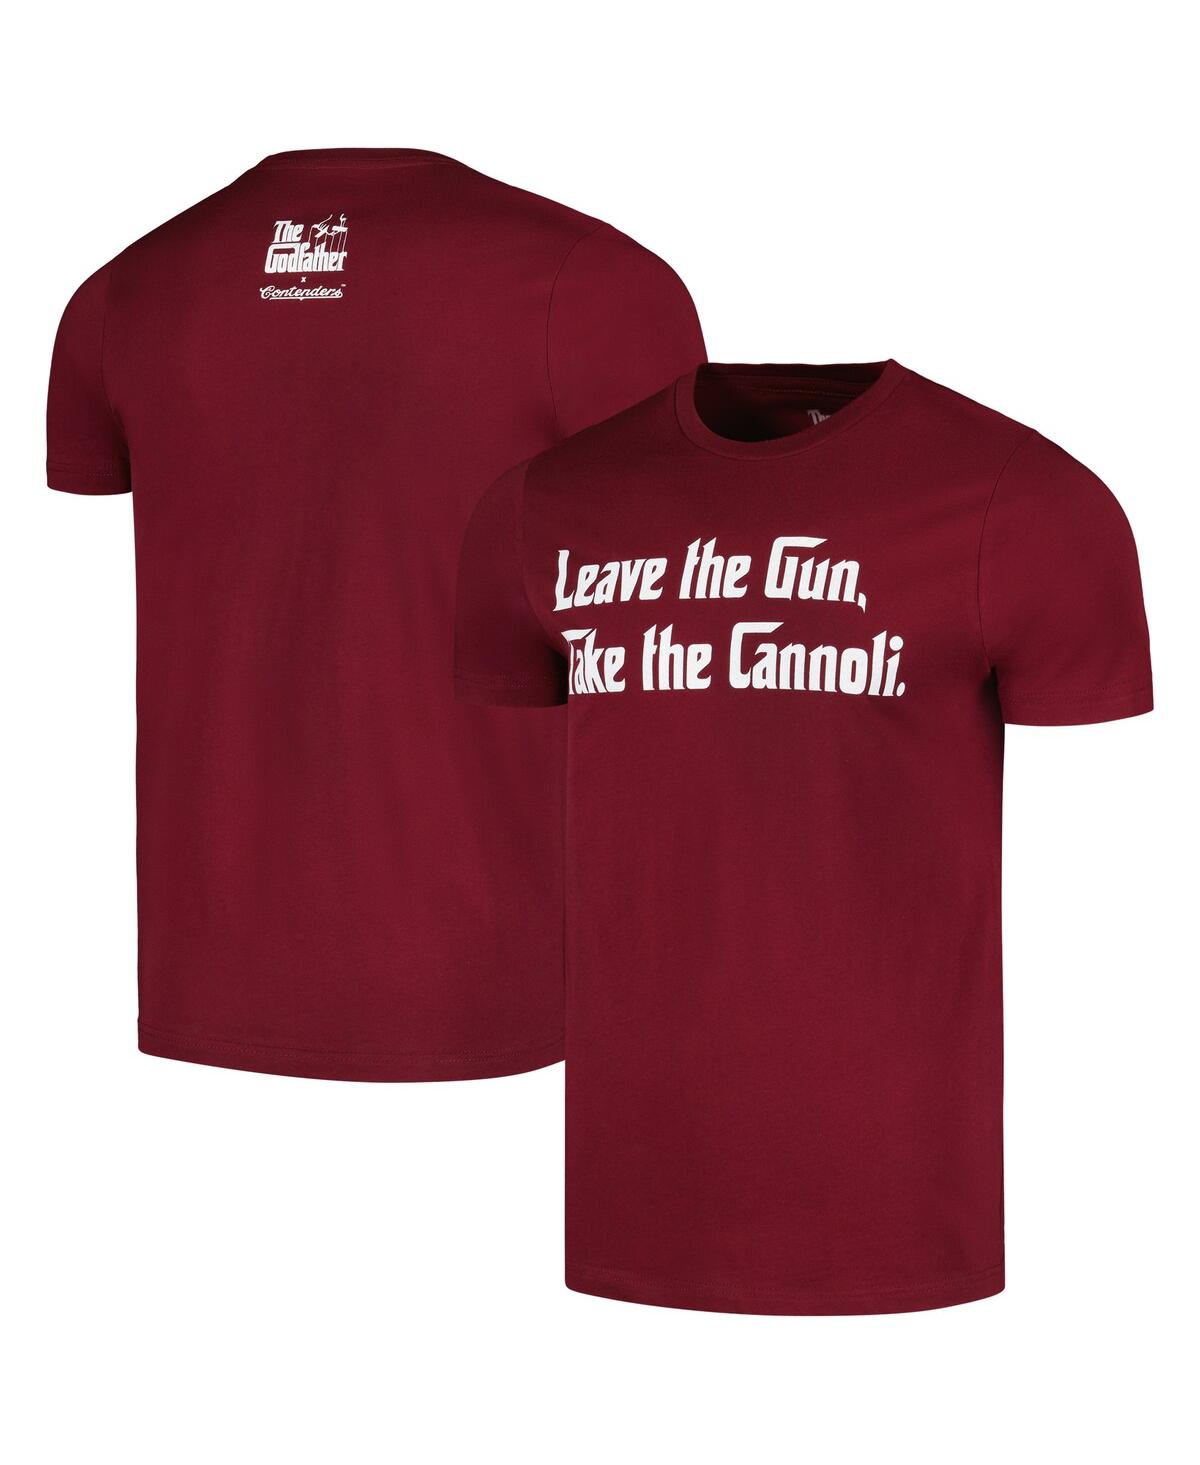 Men's and Women's Contenders Clothing Red The Godfather The Cannoli T-shirt - Red